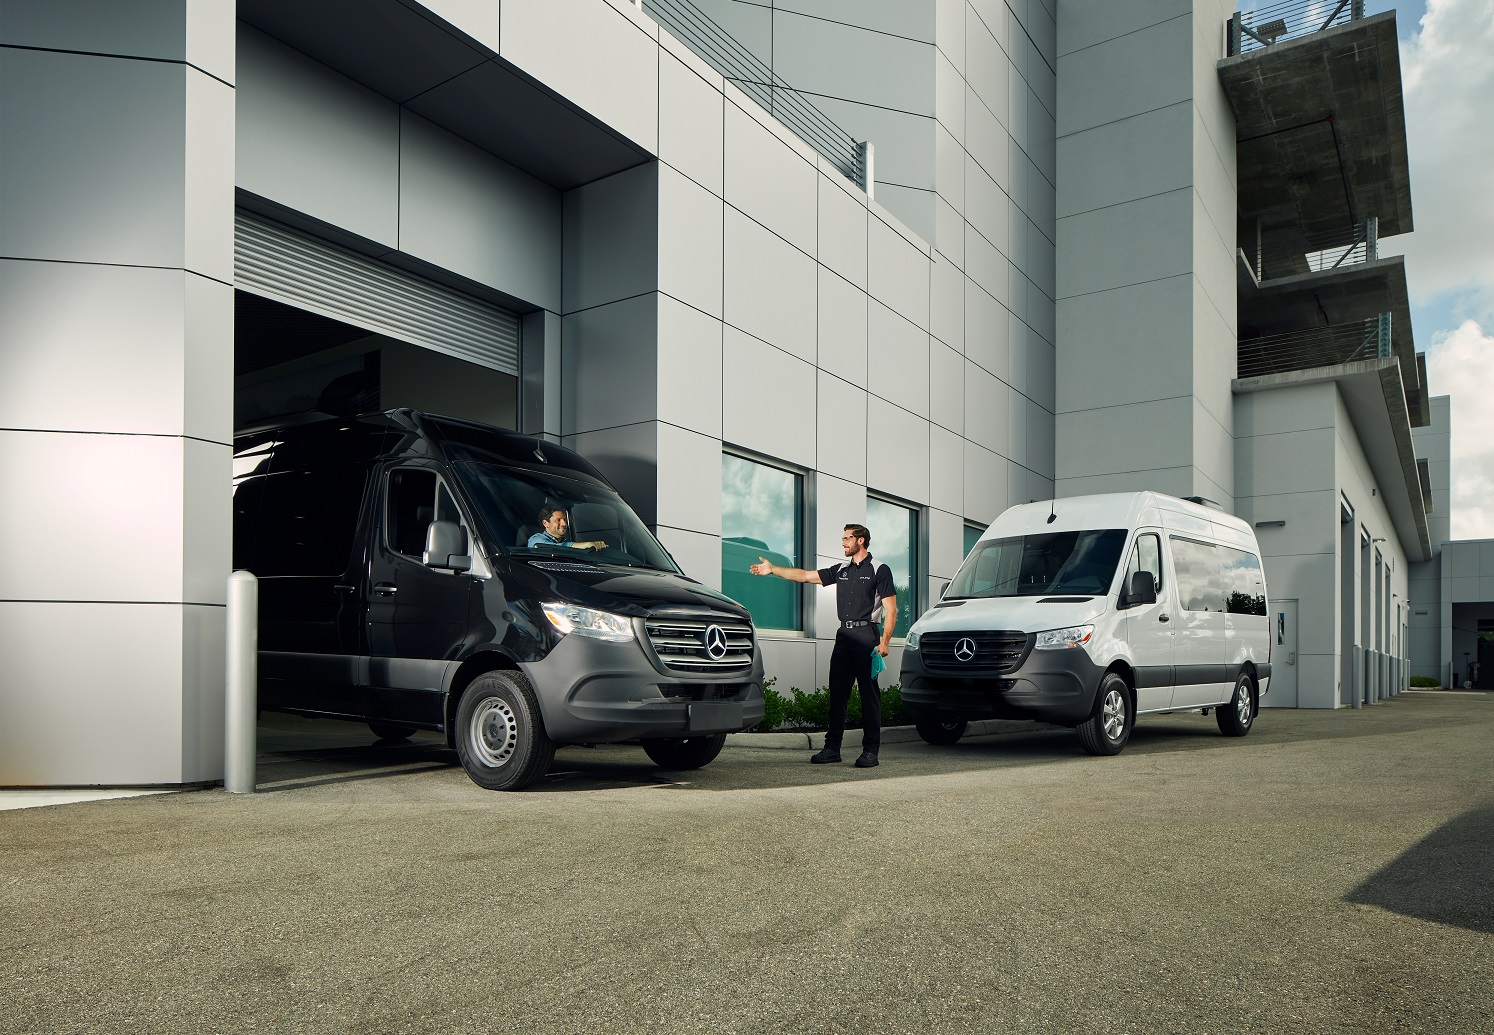 New Mercedes-Benz vans available near Portland, OR at Mercedes-Benz of Wilsonville Sprinter